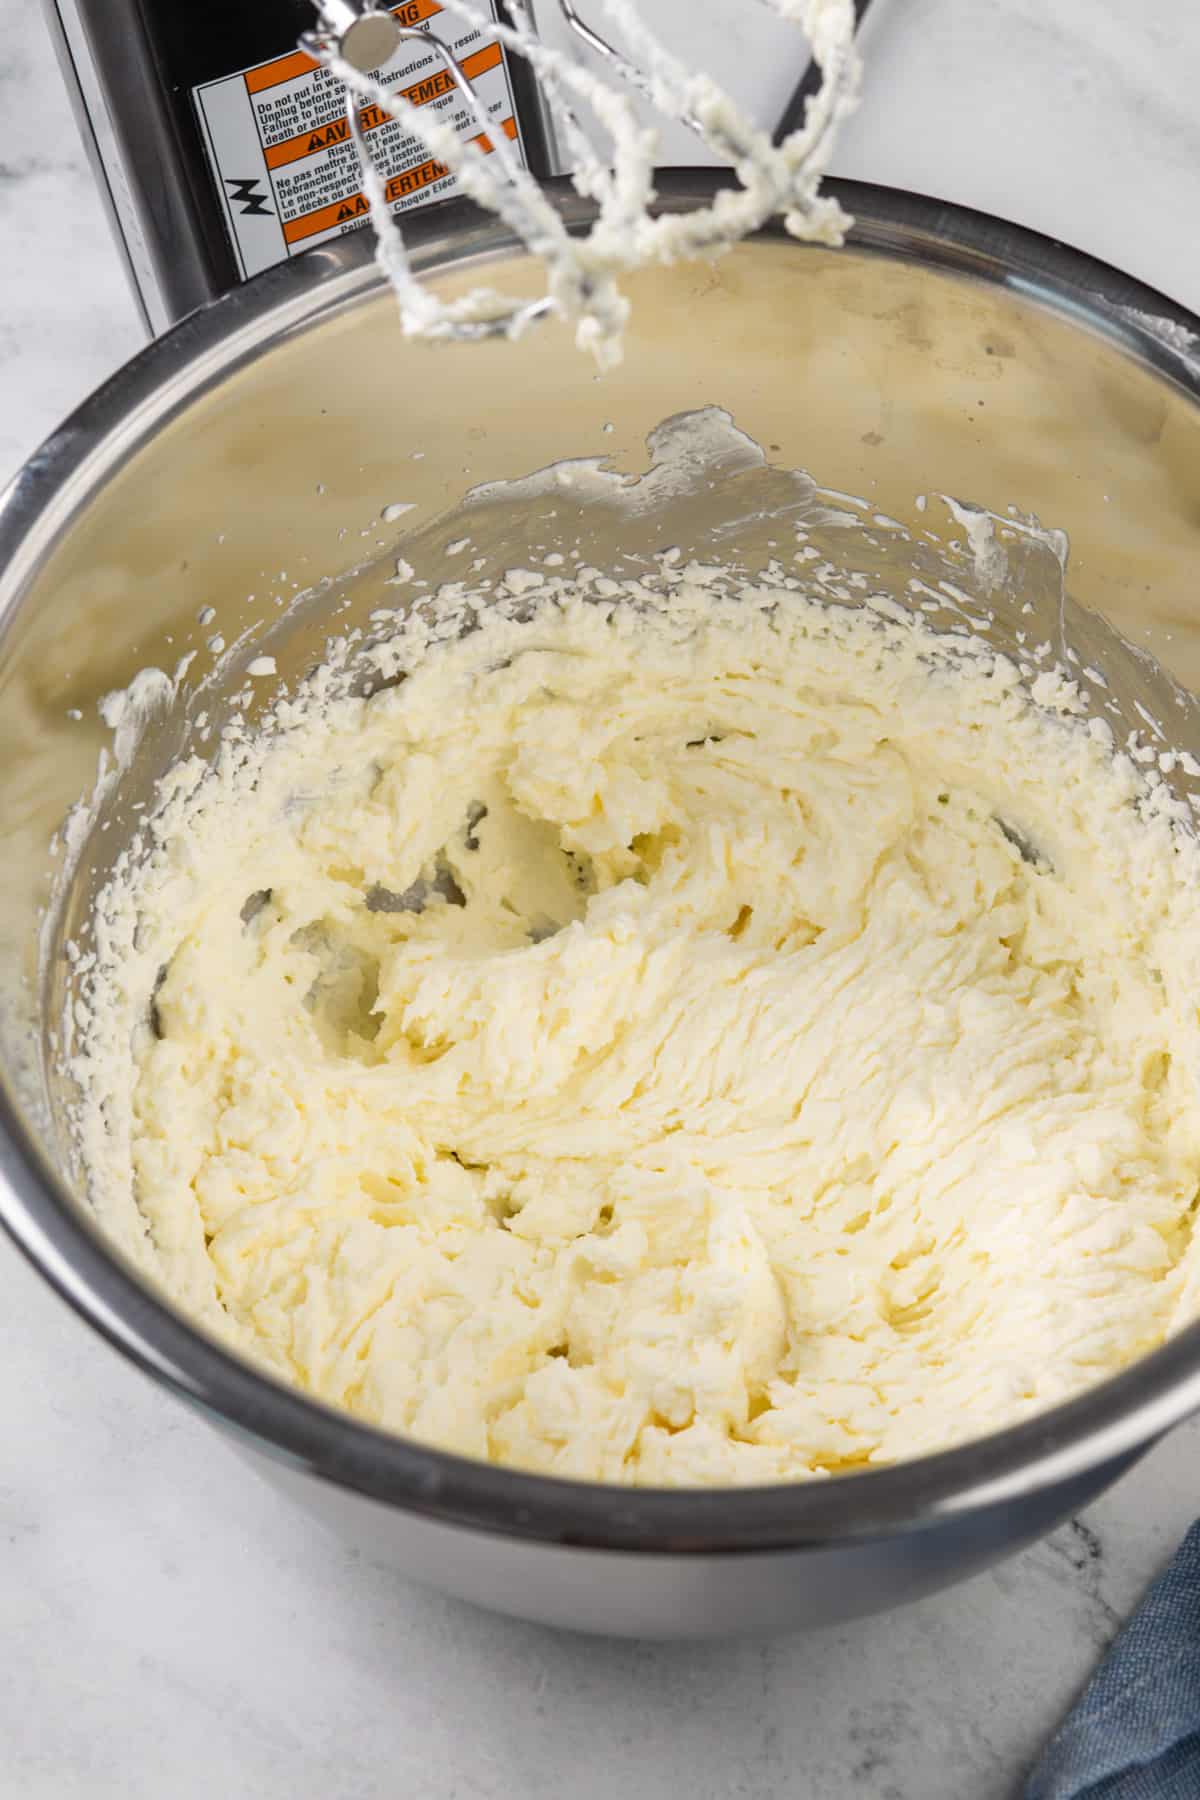 Cream being whipped into butter in a metal mixing bowl.